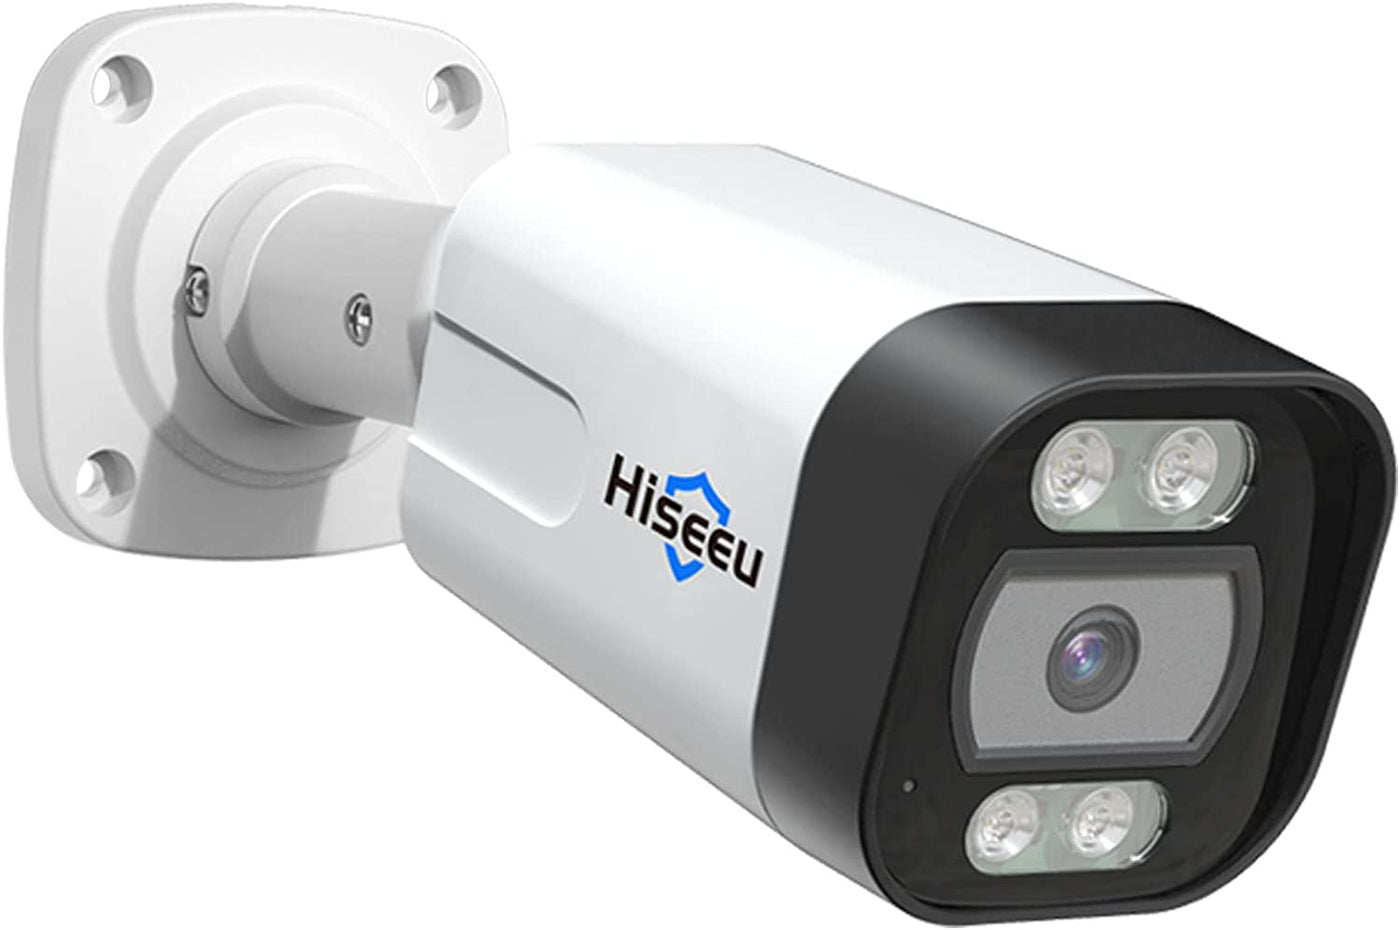 Hiseeu [2 Way Audio] 5MP PoE Camera, IP67 Waterproof Wired IP Network Security Camera Outdoor with Human Vehicle Detection,Spotlight&Sound Alarm,Night Vision, App Control Work with NVR - Hiseeu